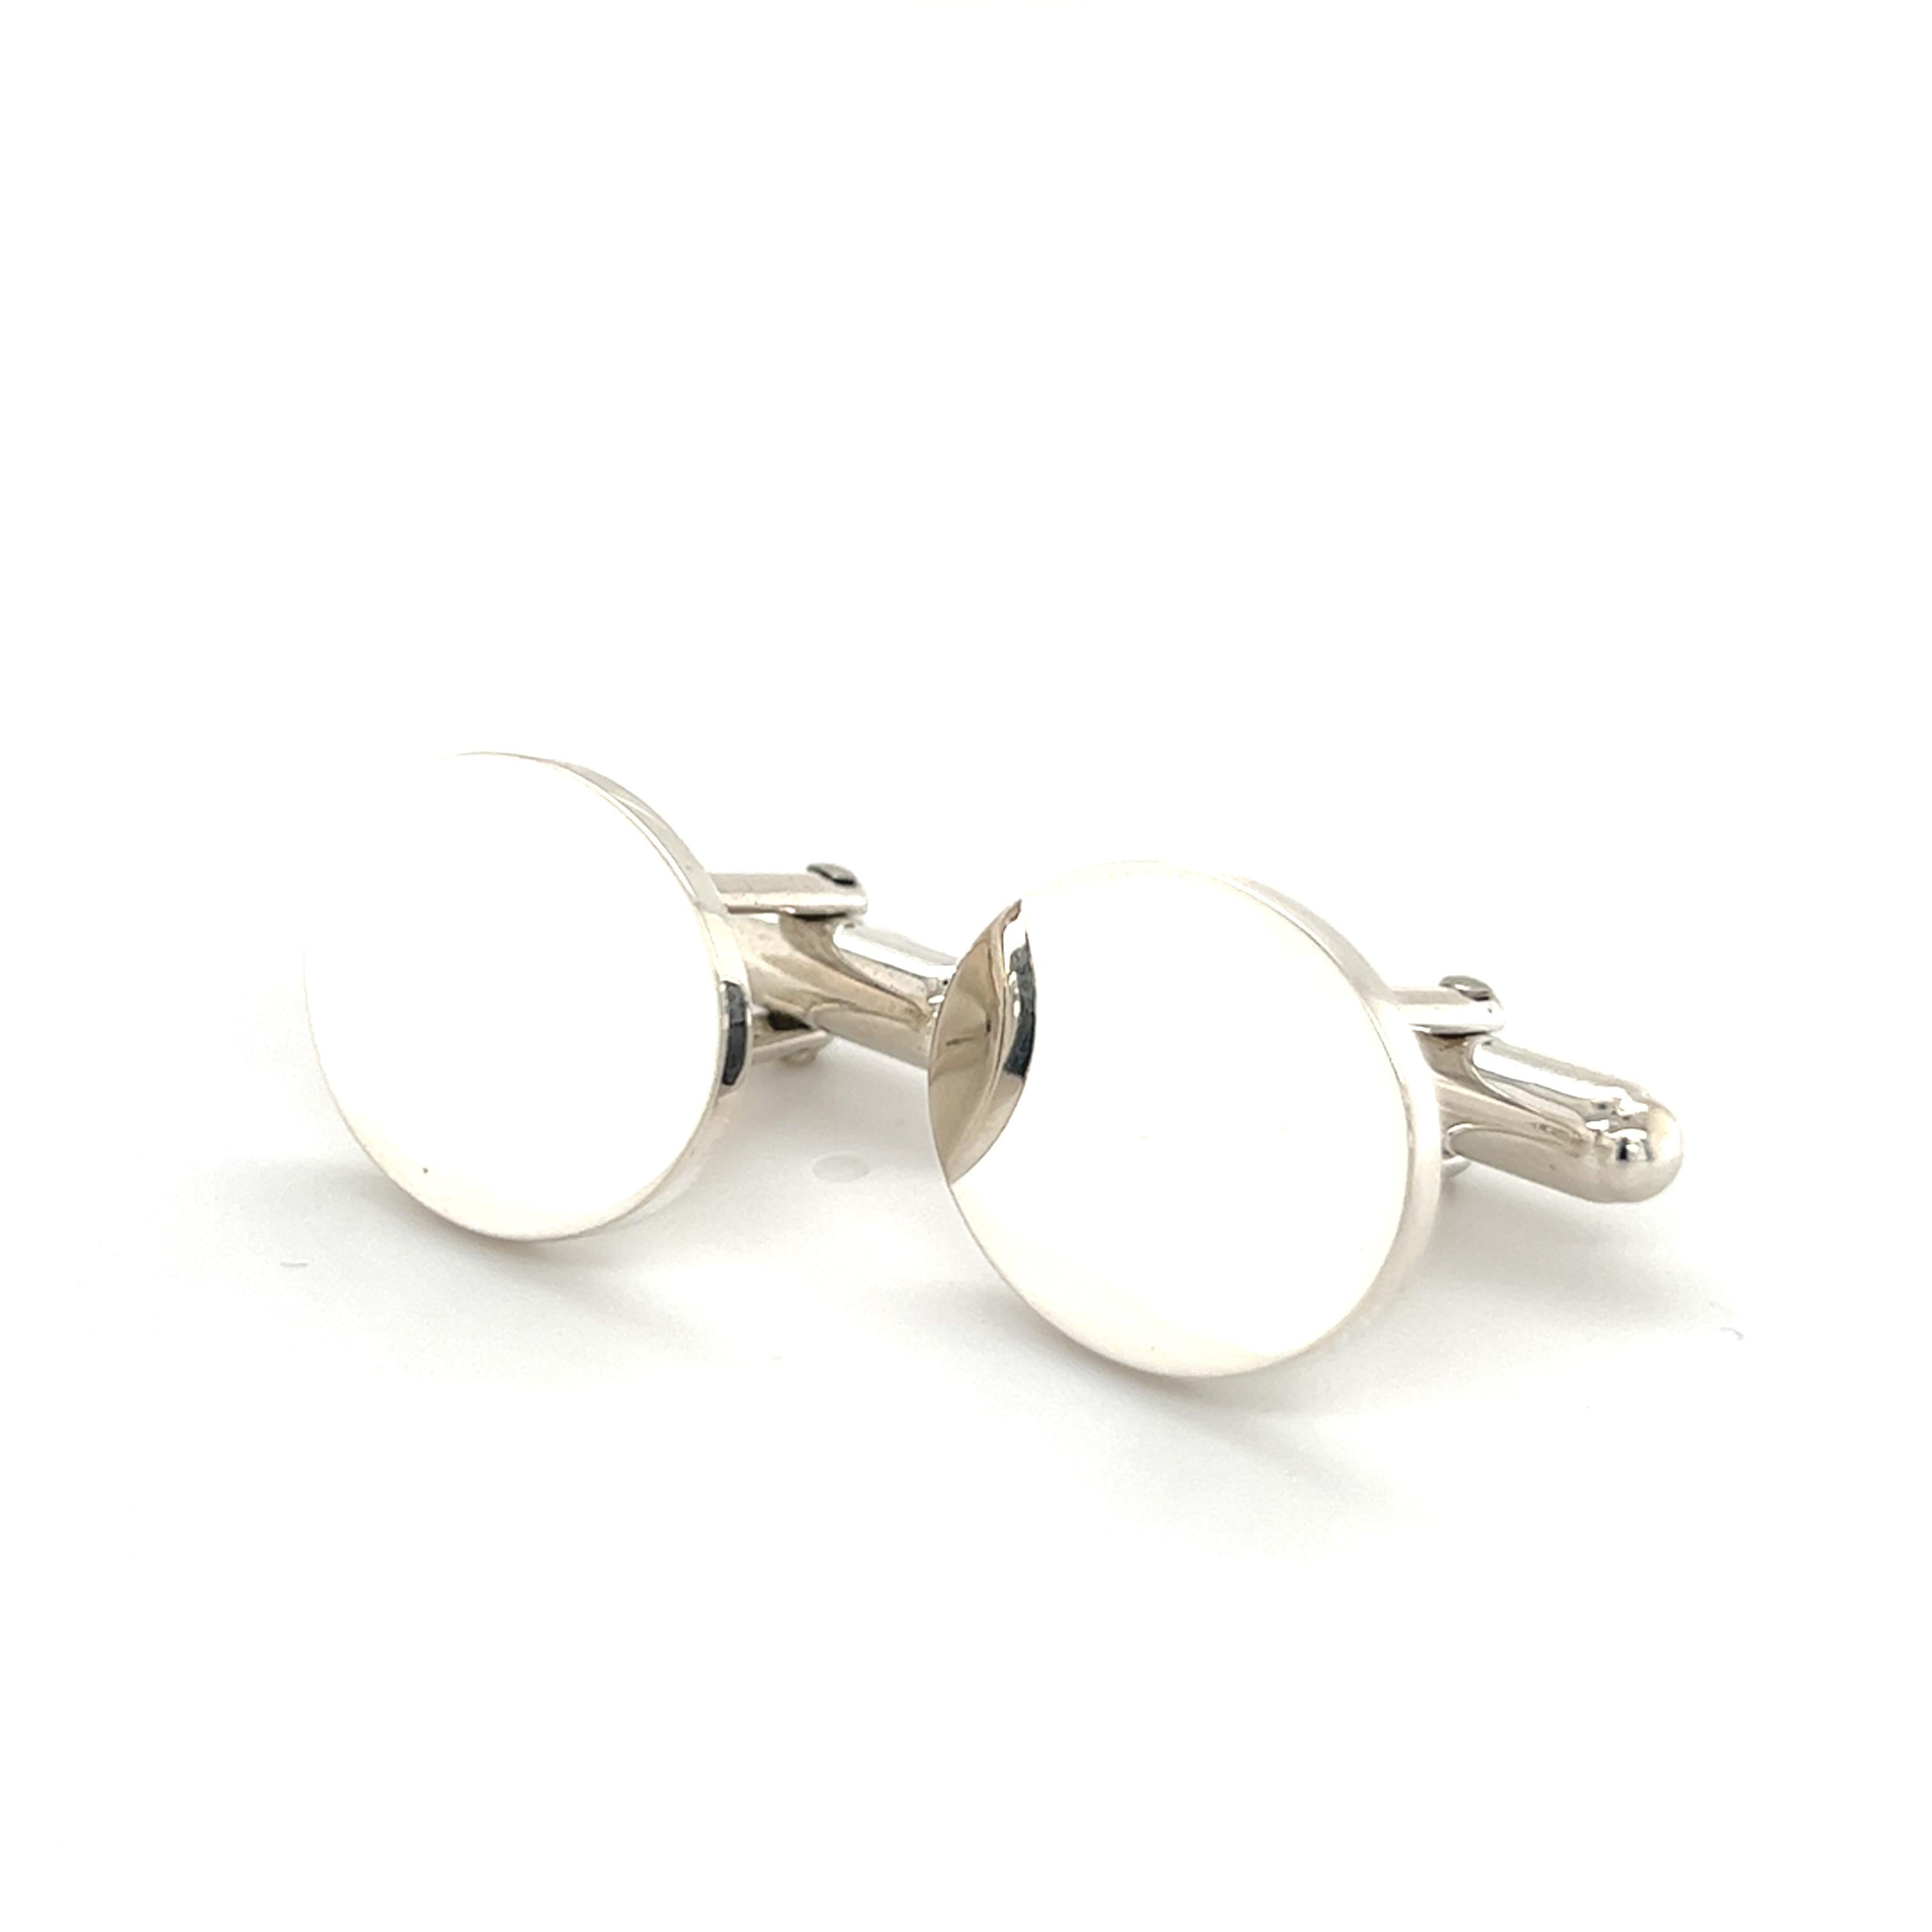 Tiffany & Co Estate Sterling Silver Cufflinks 12 Grams TIF253

TRUSTED SELLER SINCE 2002

PLEASE SEE OUR HUNDREDS OF POSITIVE FEEDBACKS FROM OUR CLIENTS!!

FREE SHIPPING

DETAILS
Metal: Sterling Silver
Weight: 12 Grams

These Authentic Tiffany & Co.